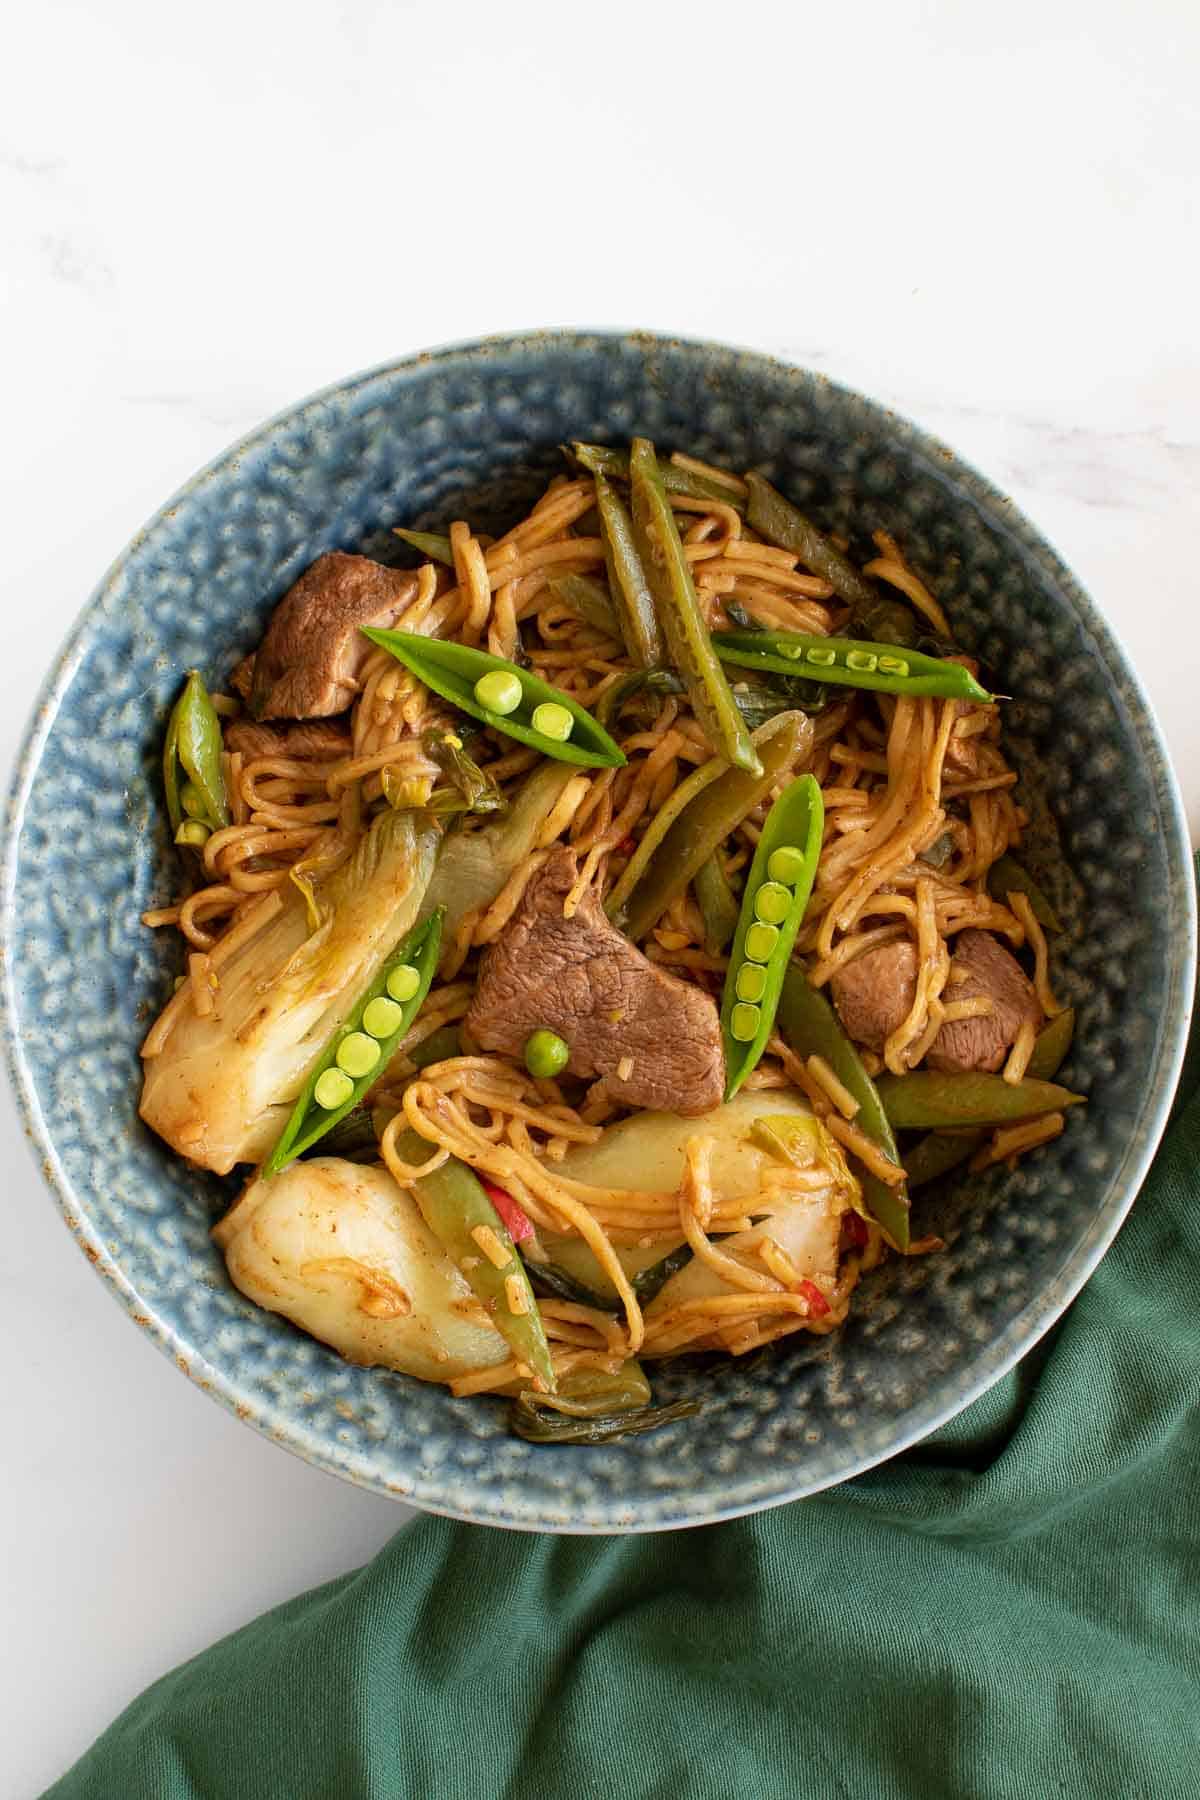 A large bowl of Duck stir fry with noodles.